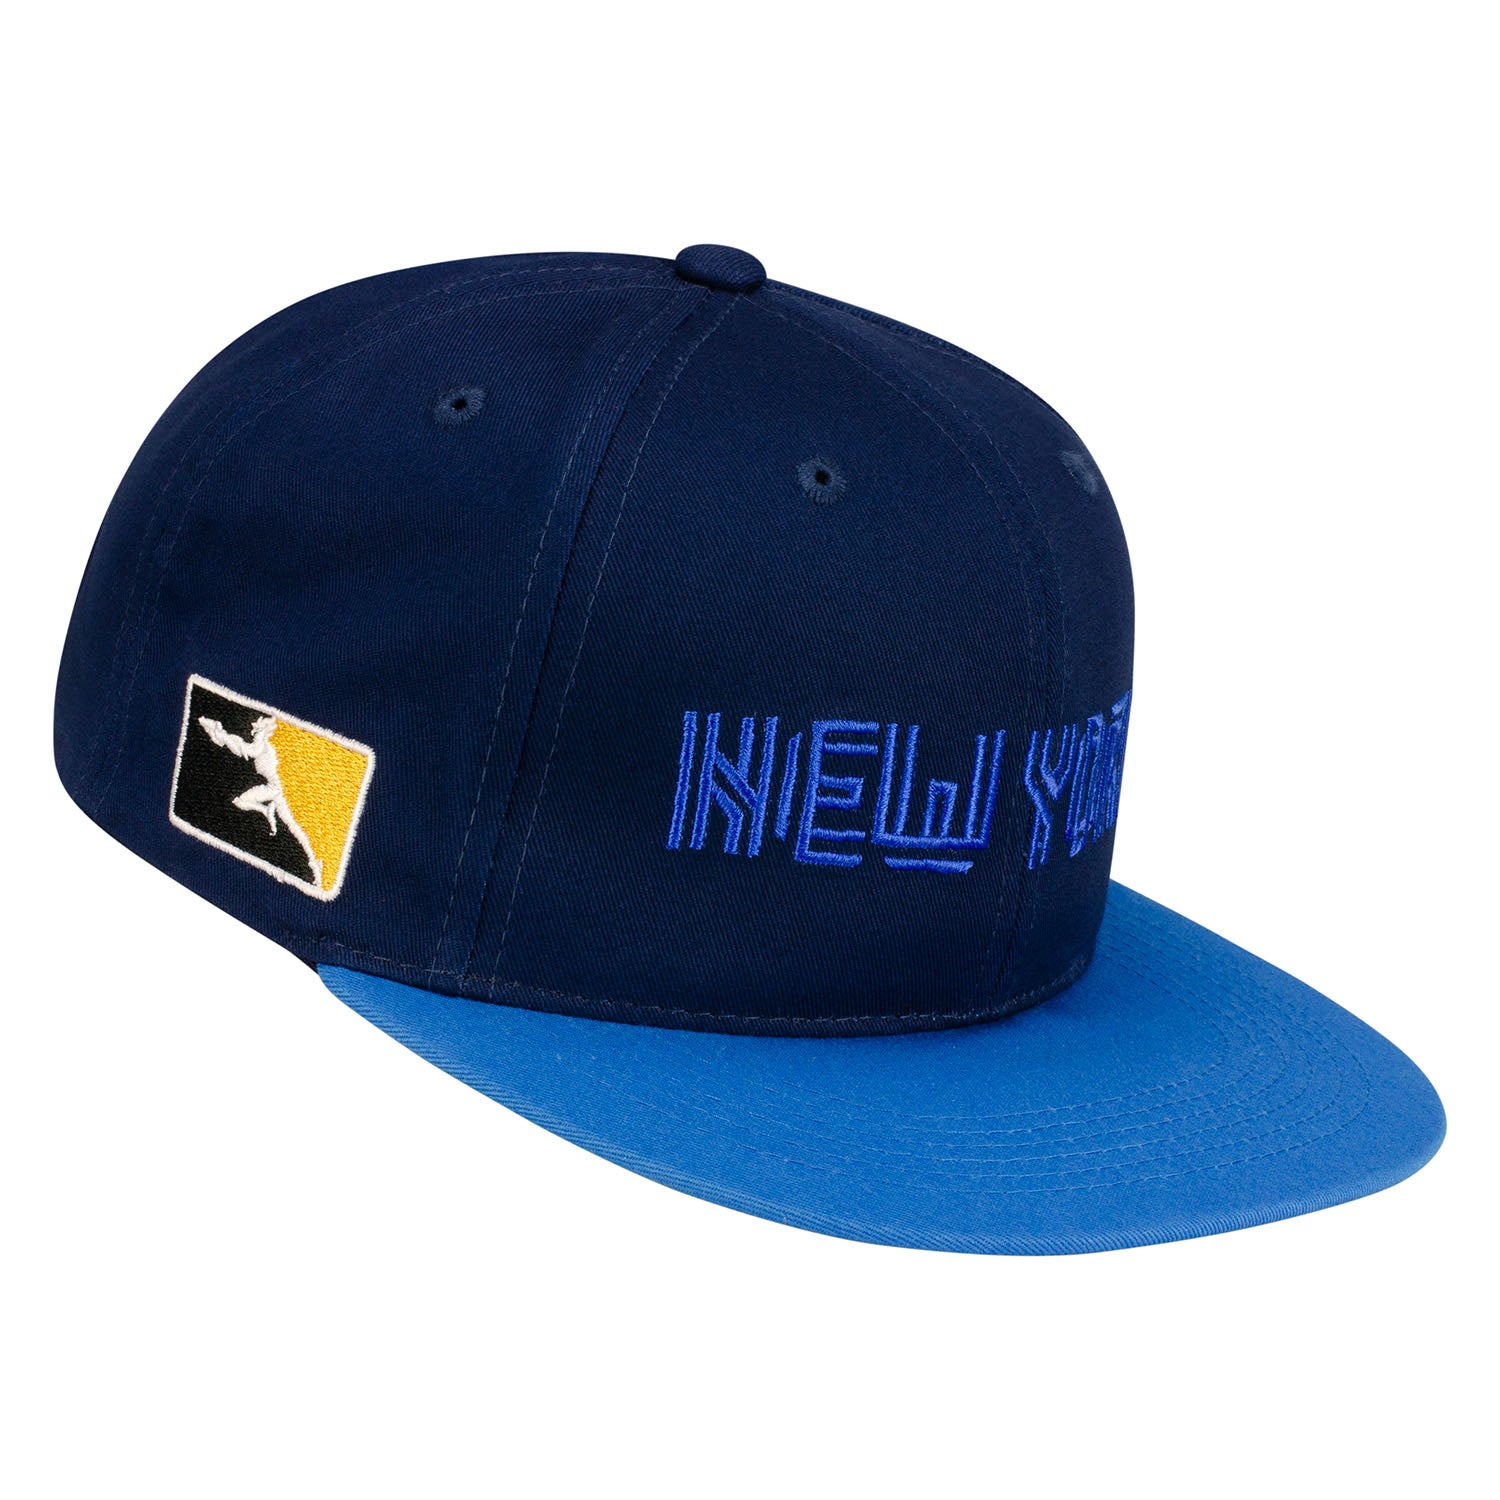 New York Excelsior Blue Snapback Hat - Right View